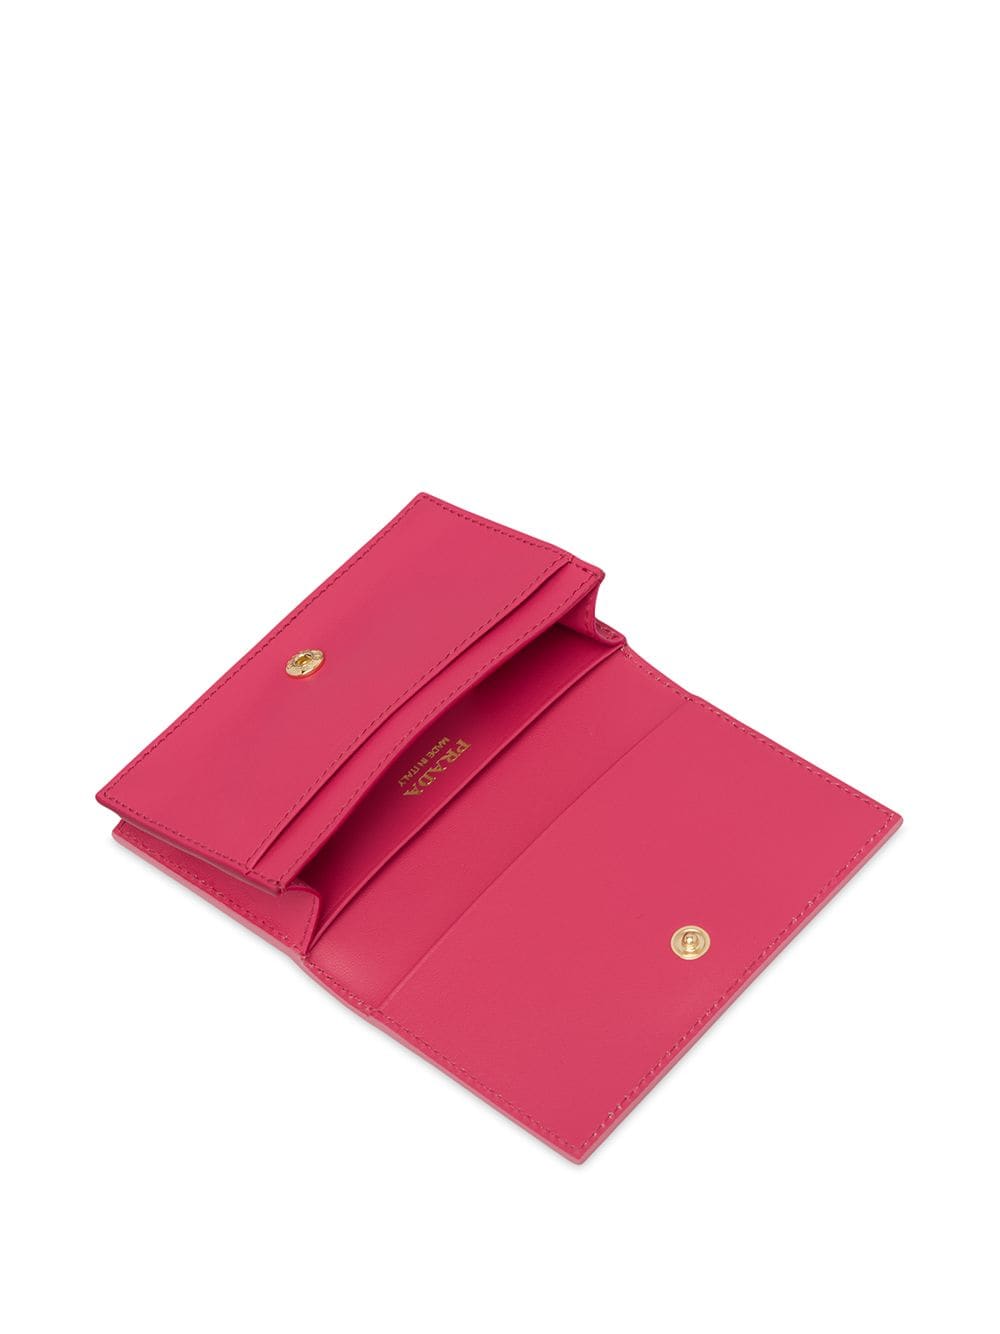 Shop Prada bow-detail folding wallet with Express Delivery - FARFETCH